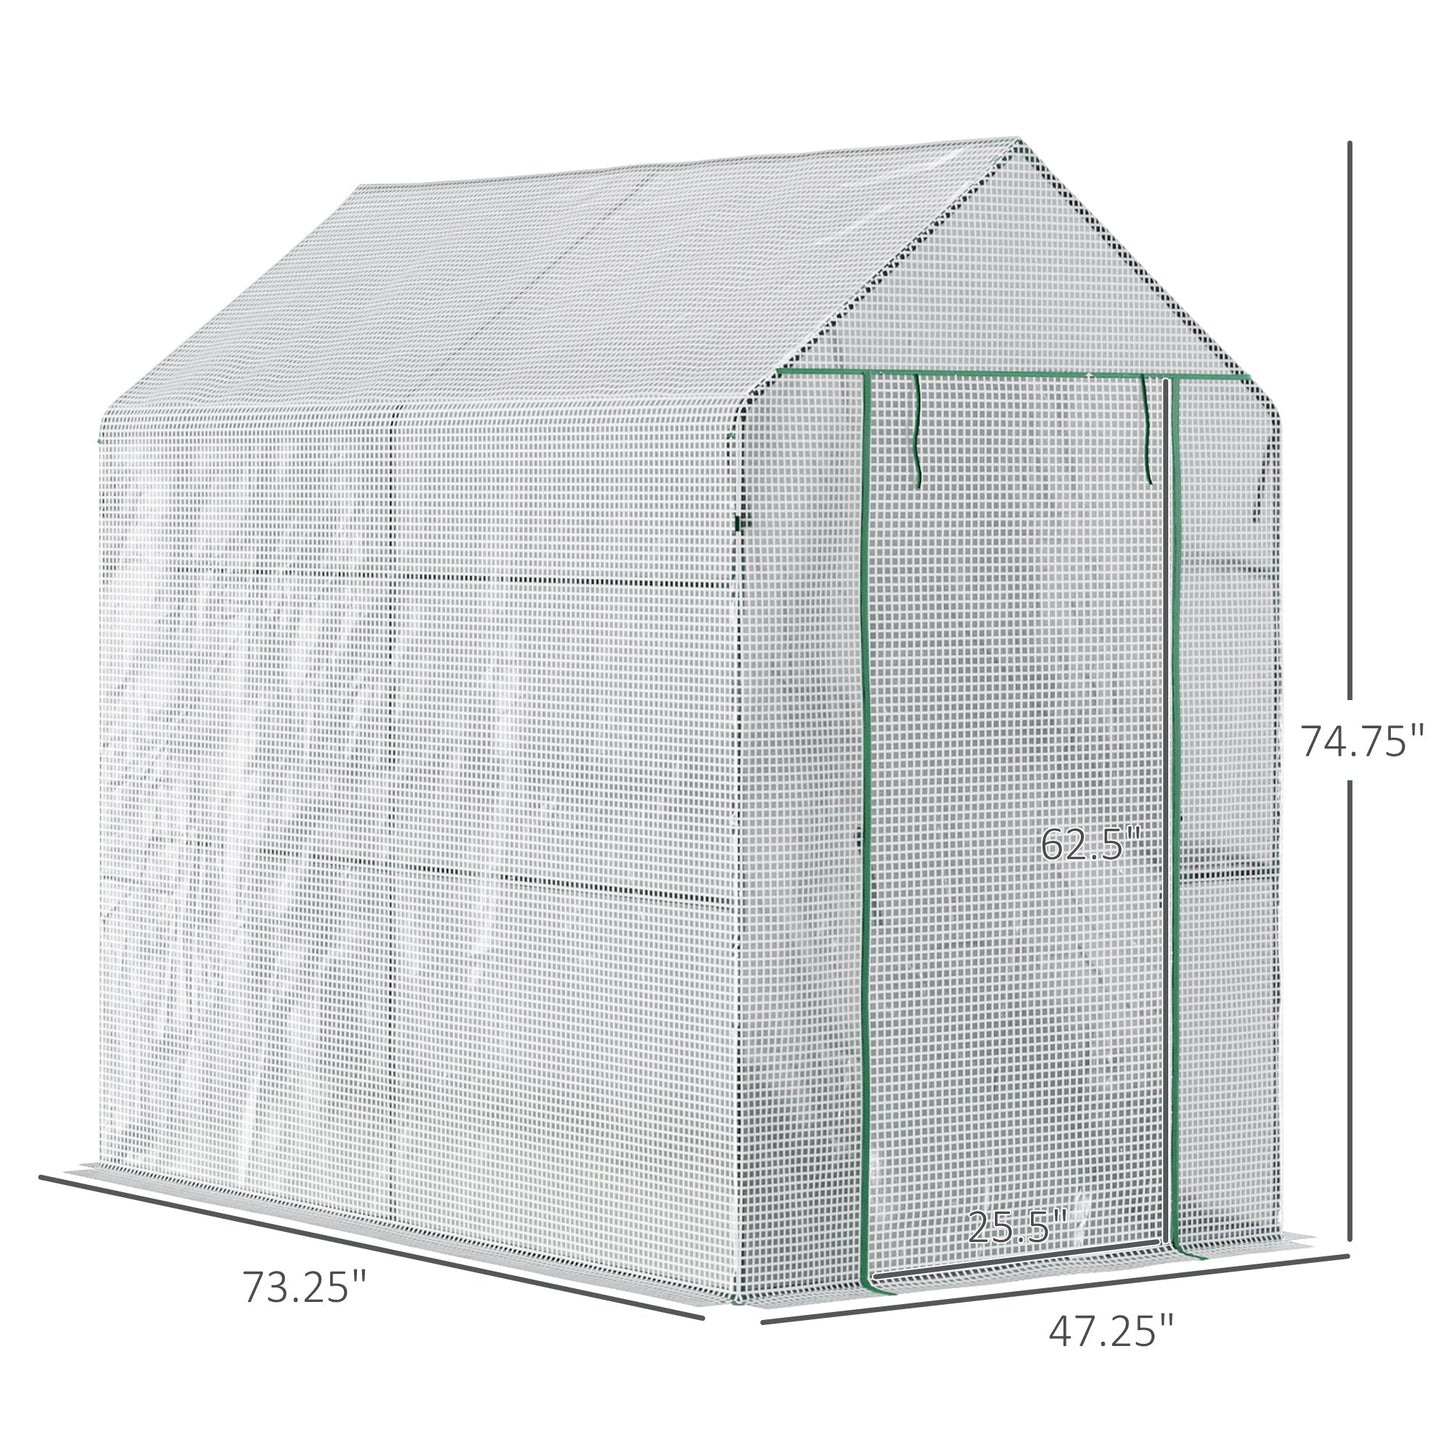 -Outsunny 47" x 73"x 75" Walk-in Small Greenhouse, Outdoor Portable Plant Flower Growing Hot House with Roll-up Door and 4 Shelves, White - Outdoor Style Company